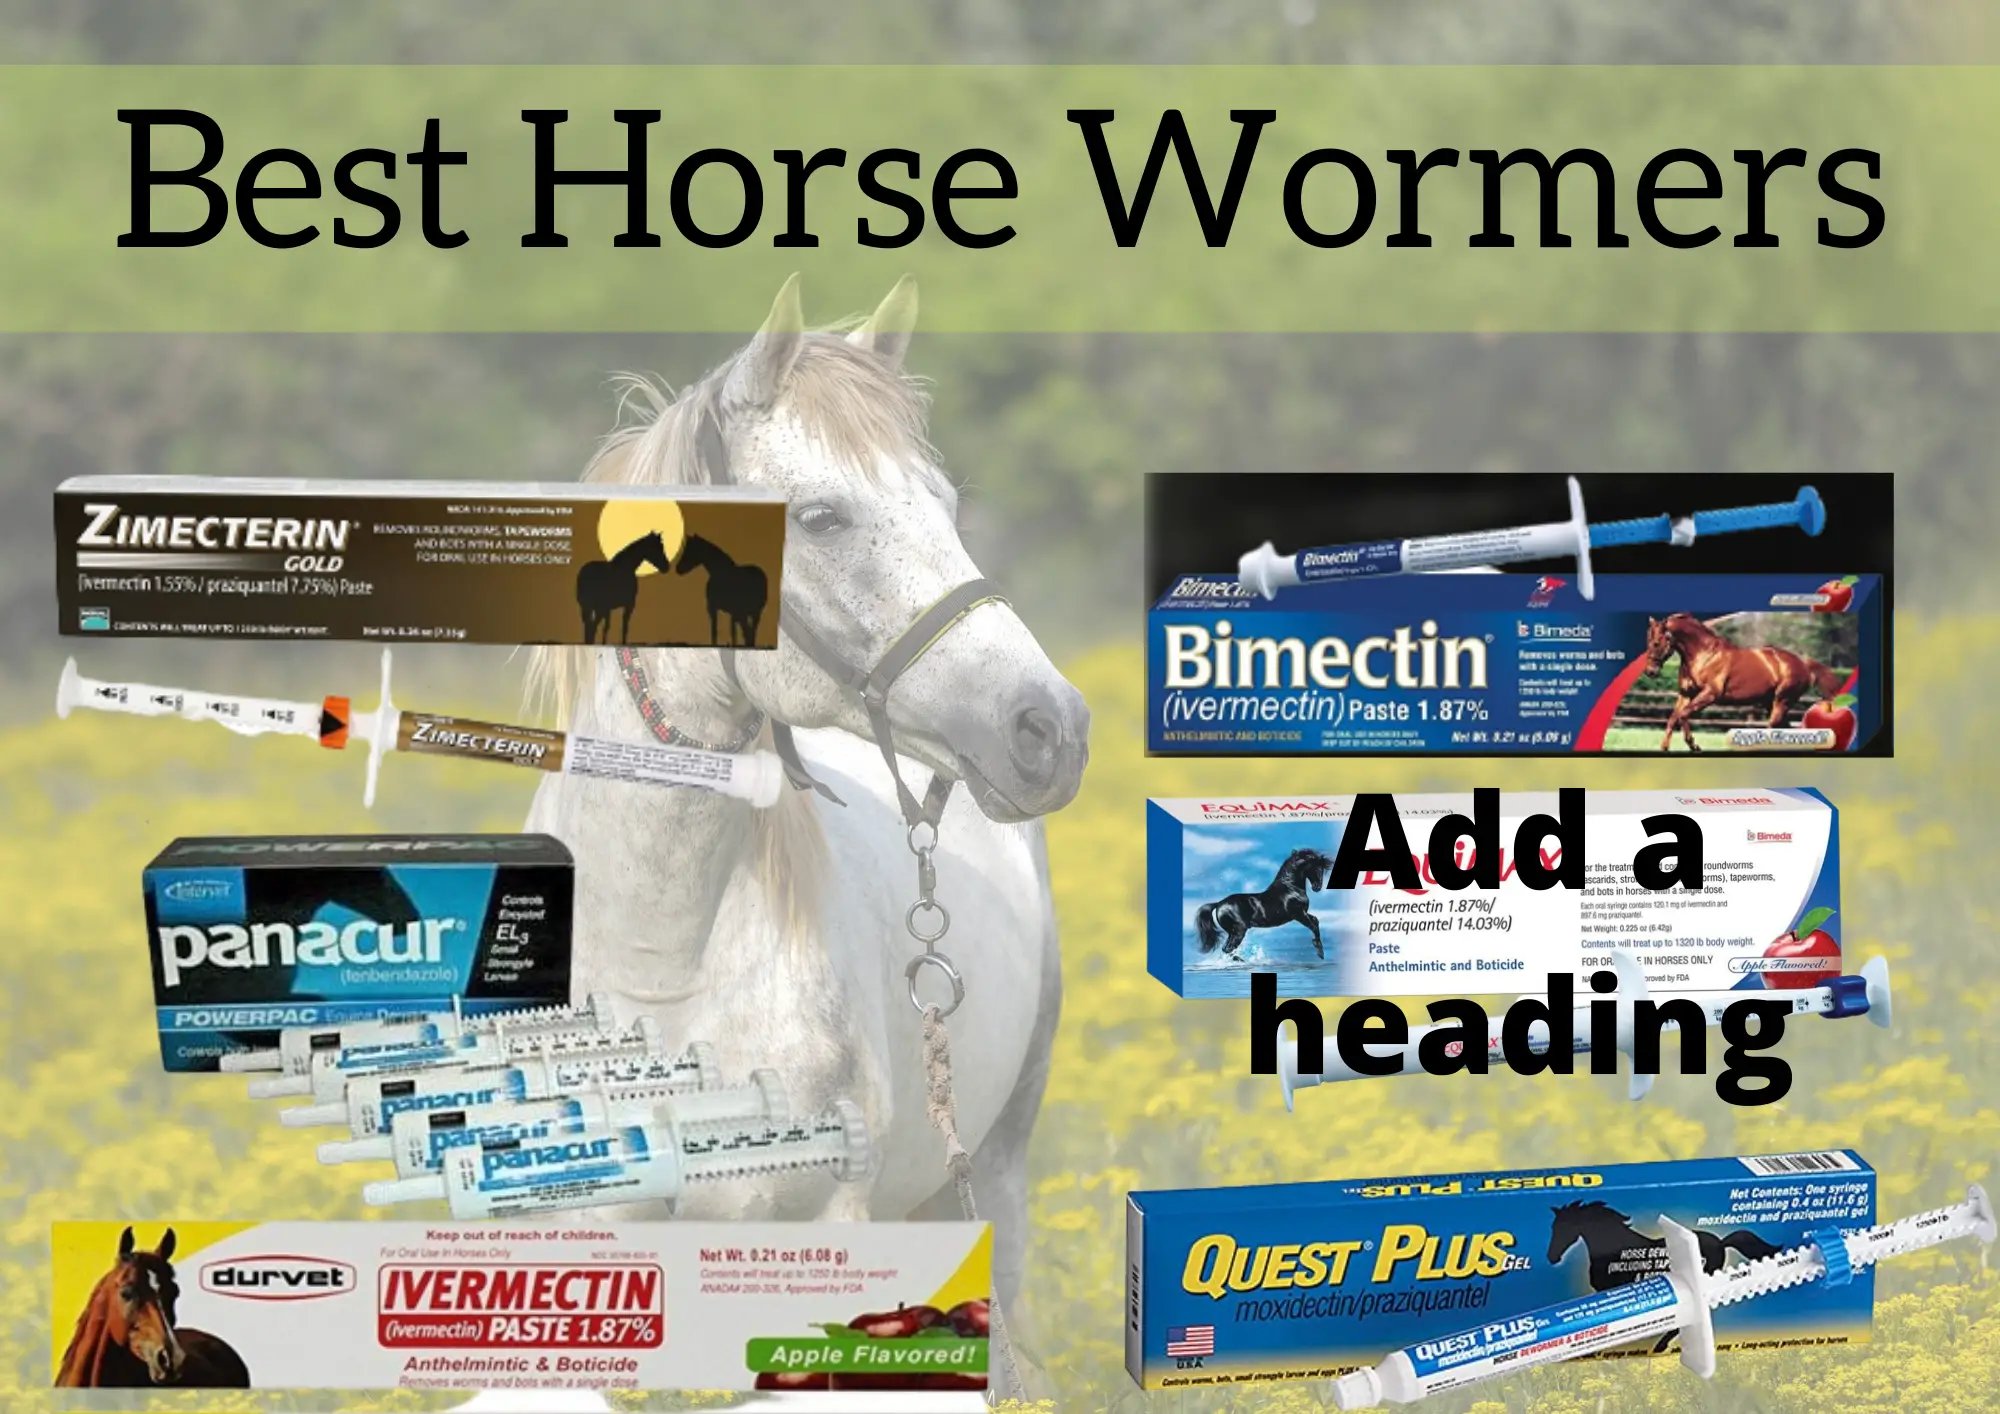 Best Horse Wormers